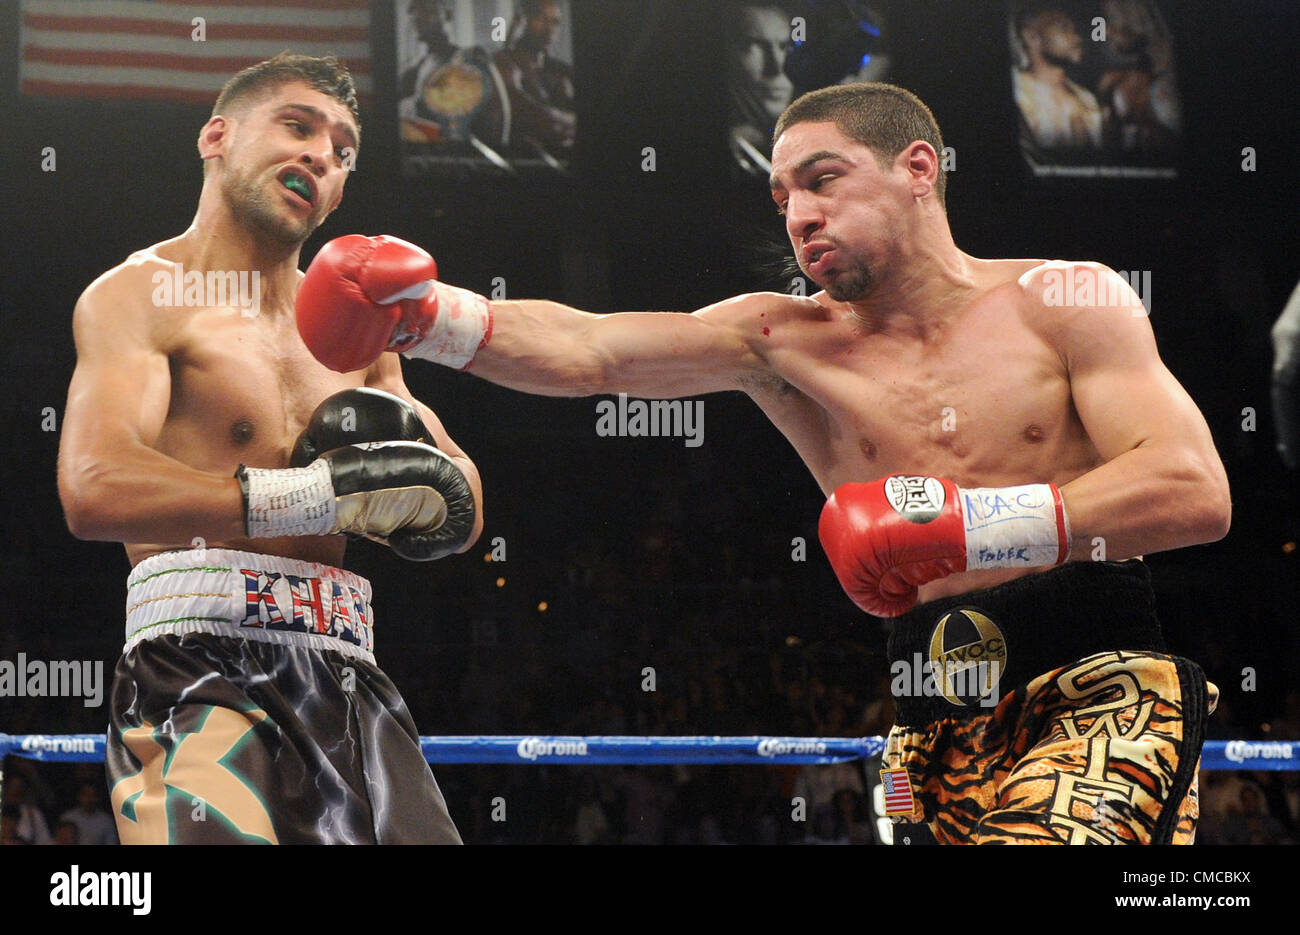 (L-R) Amir Khan (GBR), Danny Garcia (USA), JULY 14, 2012 - Boxing : Danny Garcia of the United States hits Amir Khan of Great Britain during the WBC and WBA super lightweight titles bout at Mandalay Bay Events Center in Las Vegas, Nevada, United States. (Photo by Naoki Fukuda/AFLO) Stock Photo